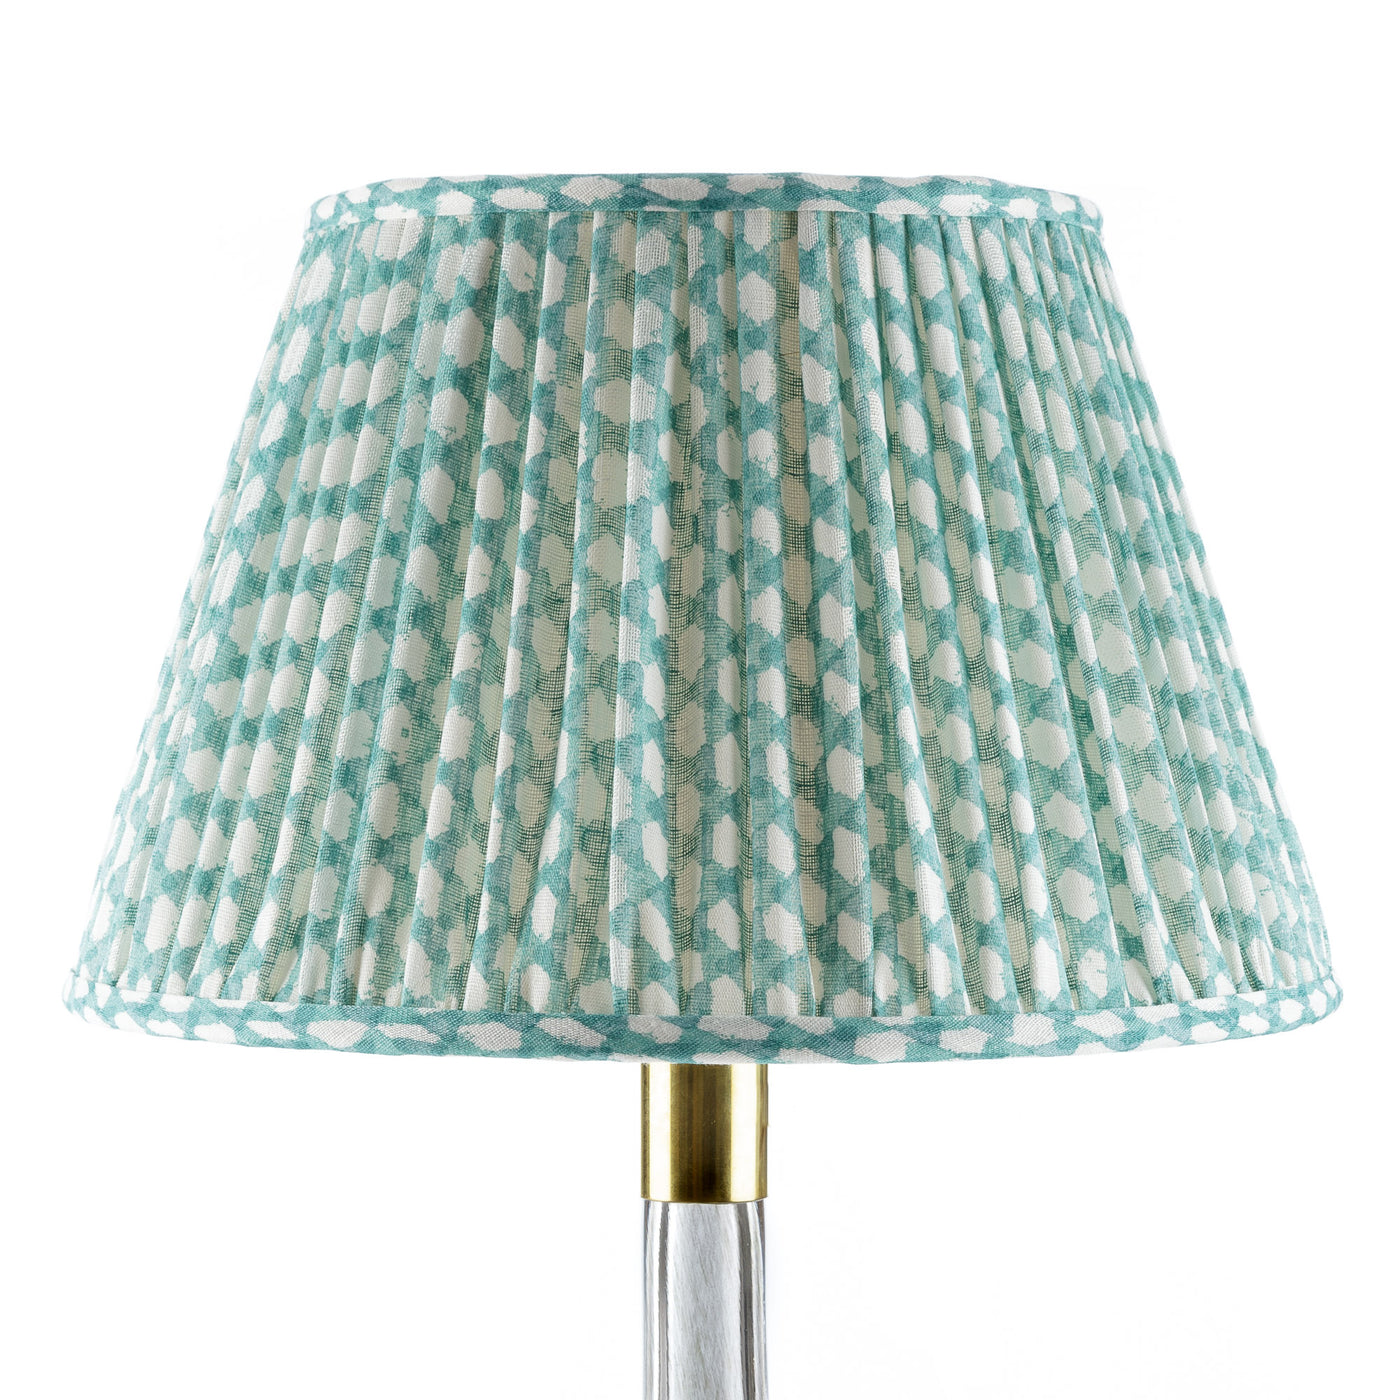 Fermoie Lampshade - Wicker in Turquoise  | Newport Lamp And Shade | Located in Newport, RI